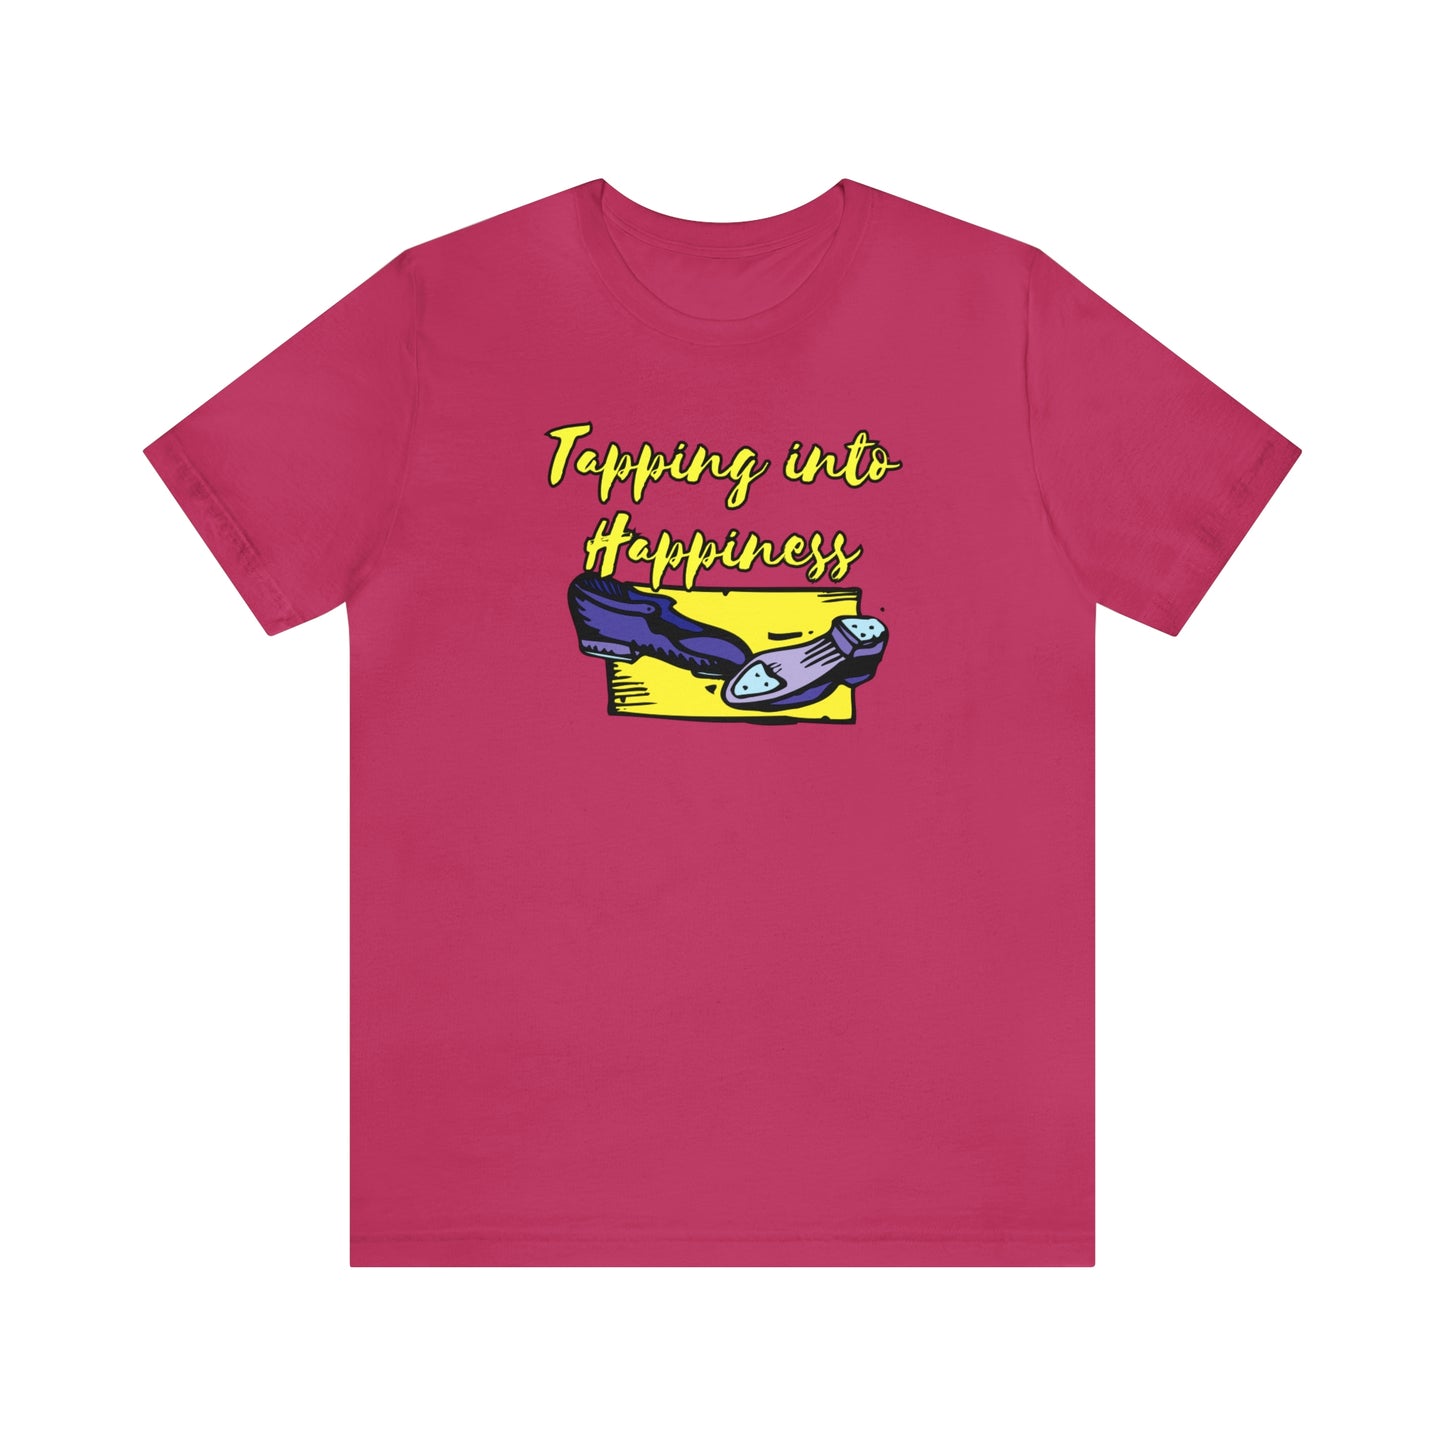 A T-shirt with the text "Tapping into happines" and a picture of tap dance shoes